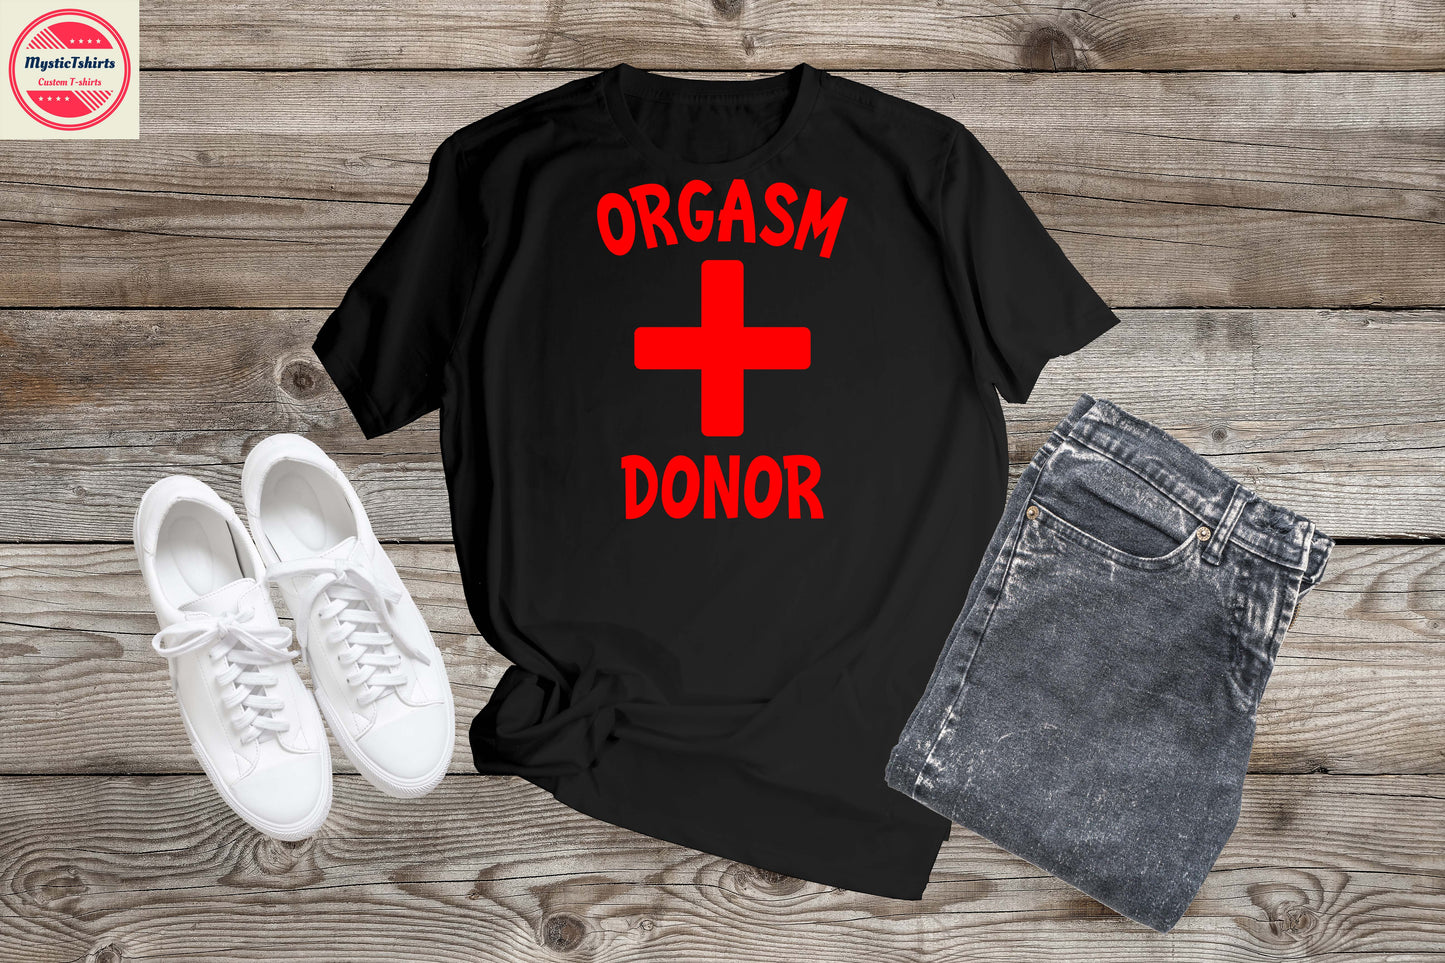 394. ORGASM DONOR, Personalized T-Shirt, Custom Text, Make Your Own Shirt, Custom Tee